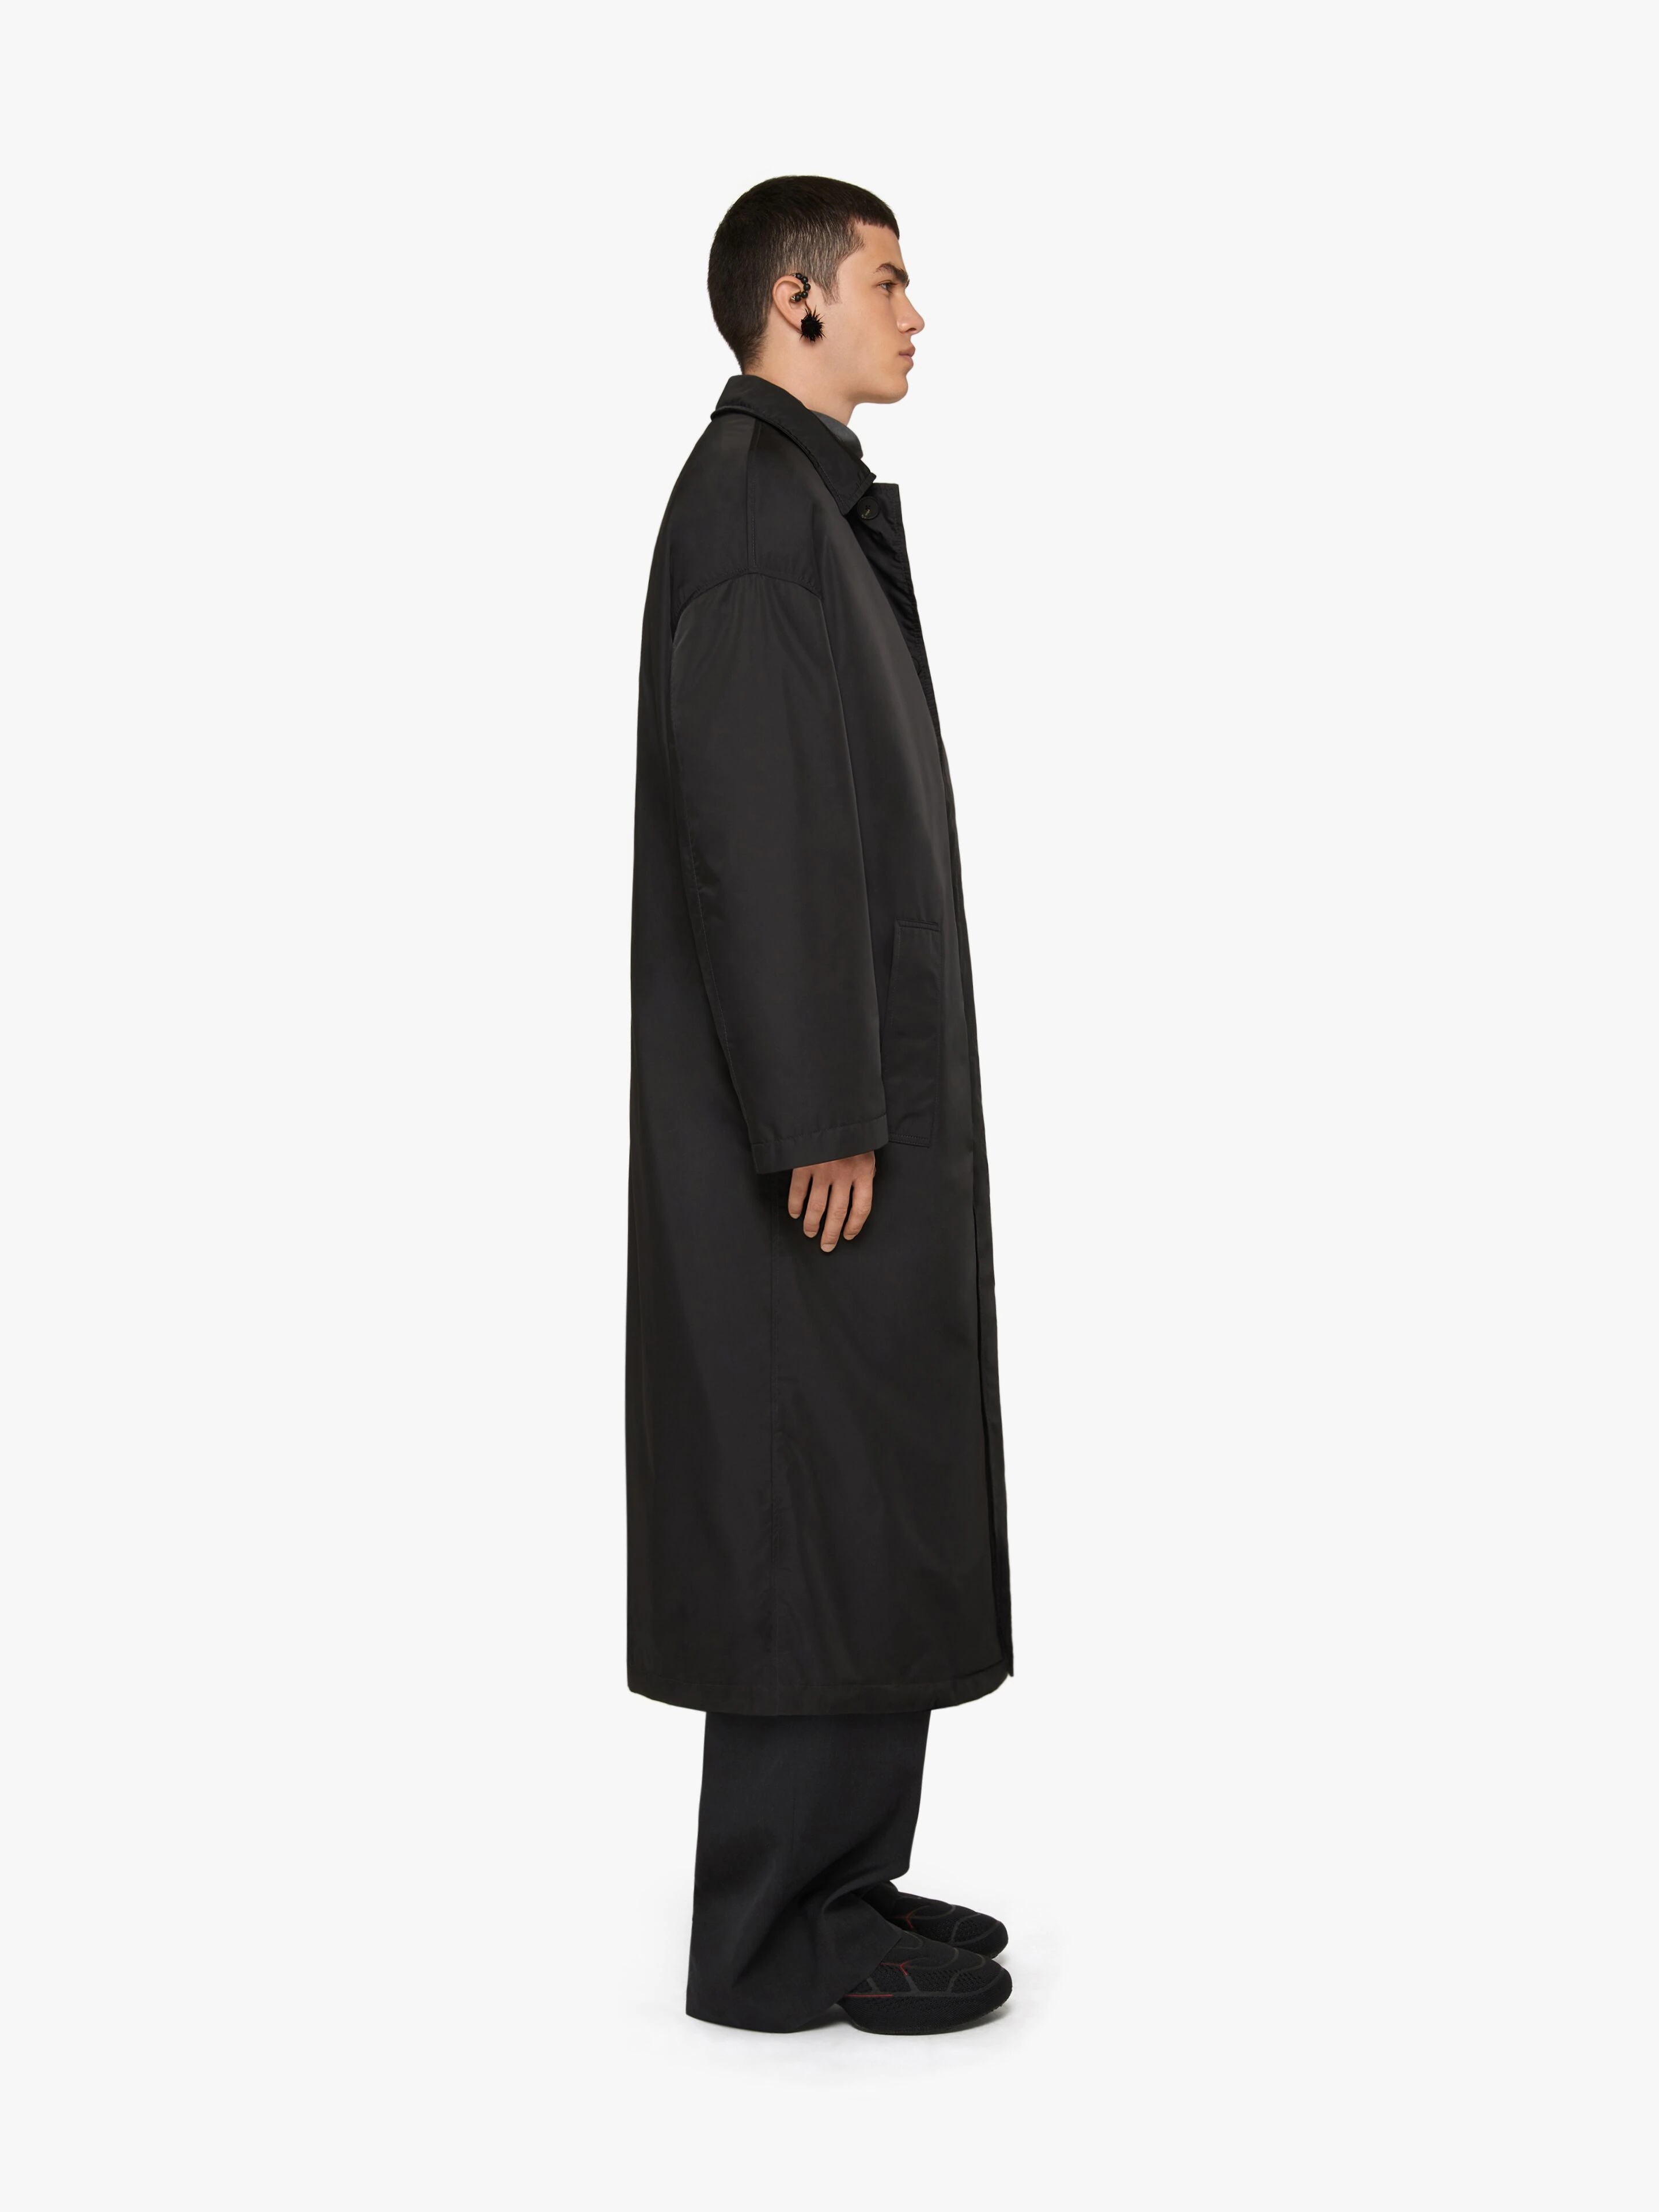 TRENCH COAT IN TECHNICAL NYLON WITH REMOVABLE LINING - 3